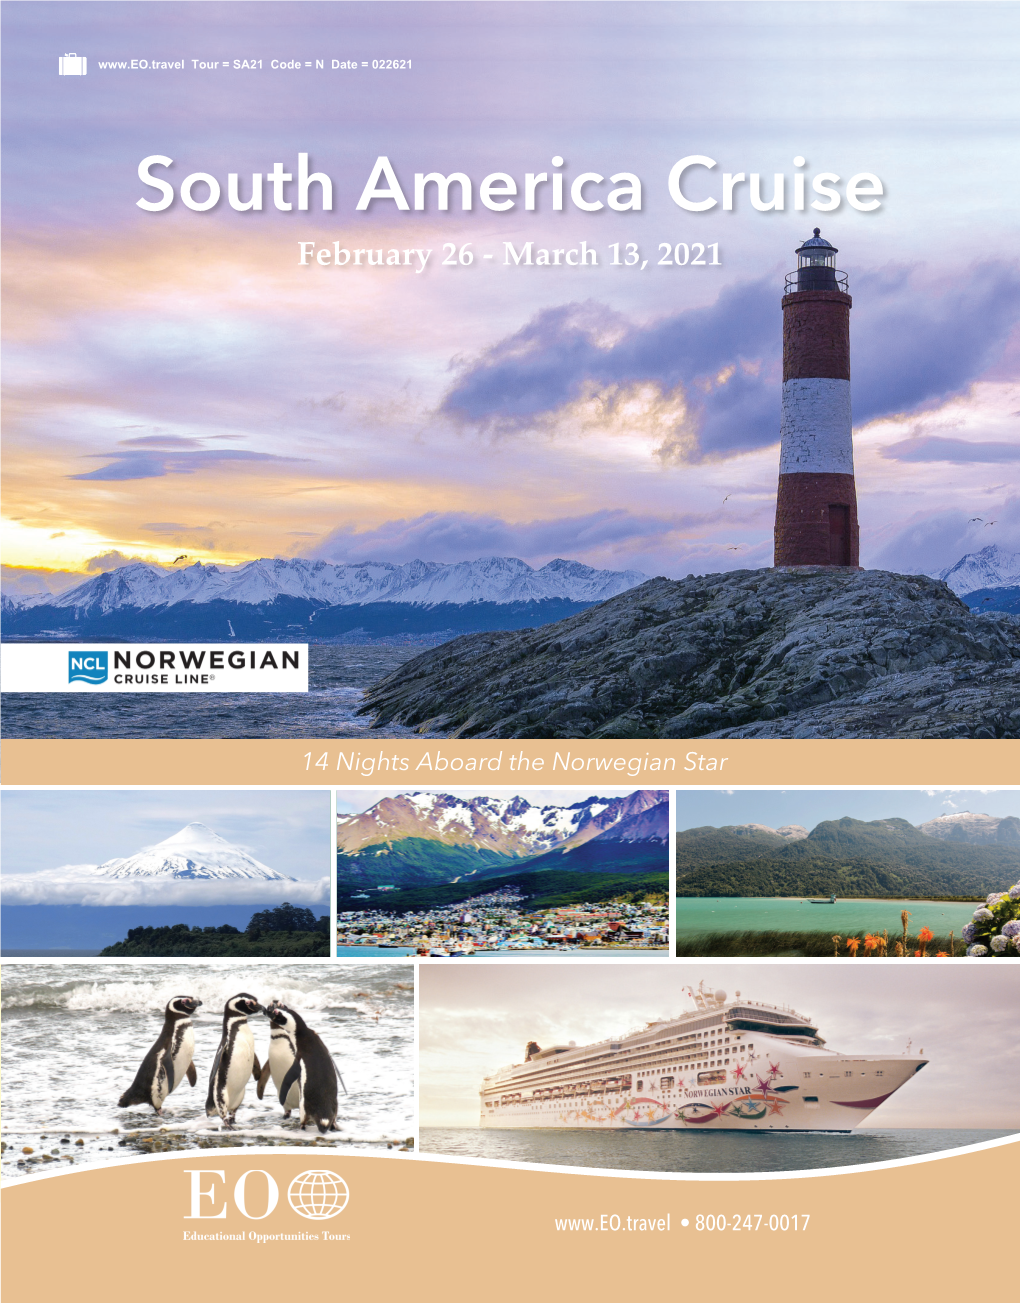 South America Cruise February 26 - March 13, 2021